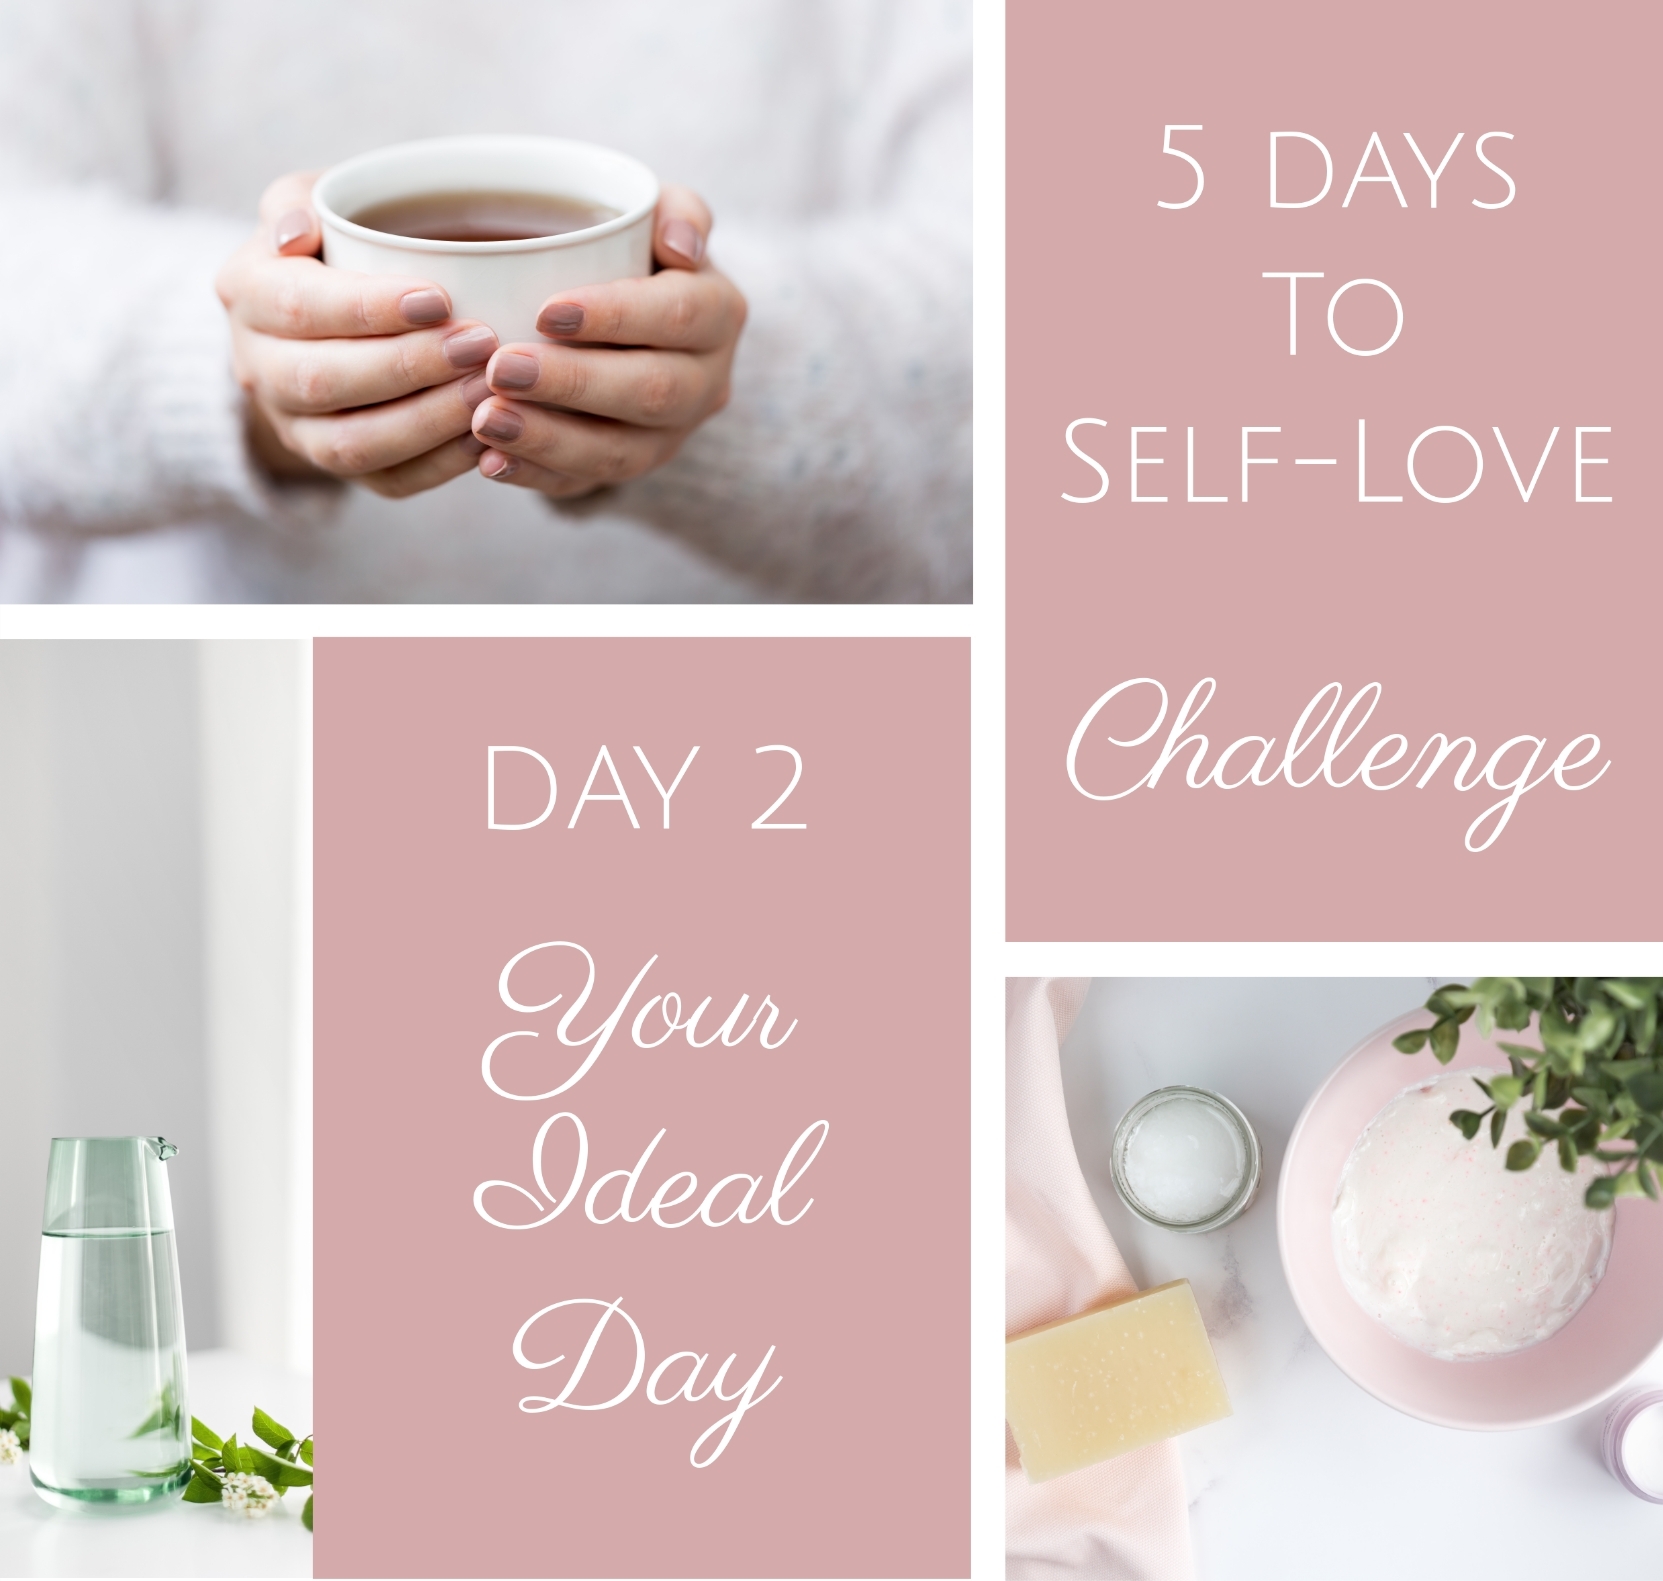 5 days to selflove - ideal day